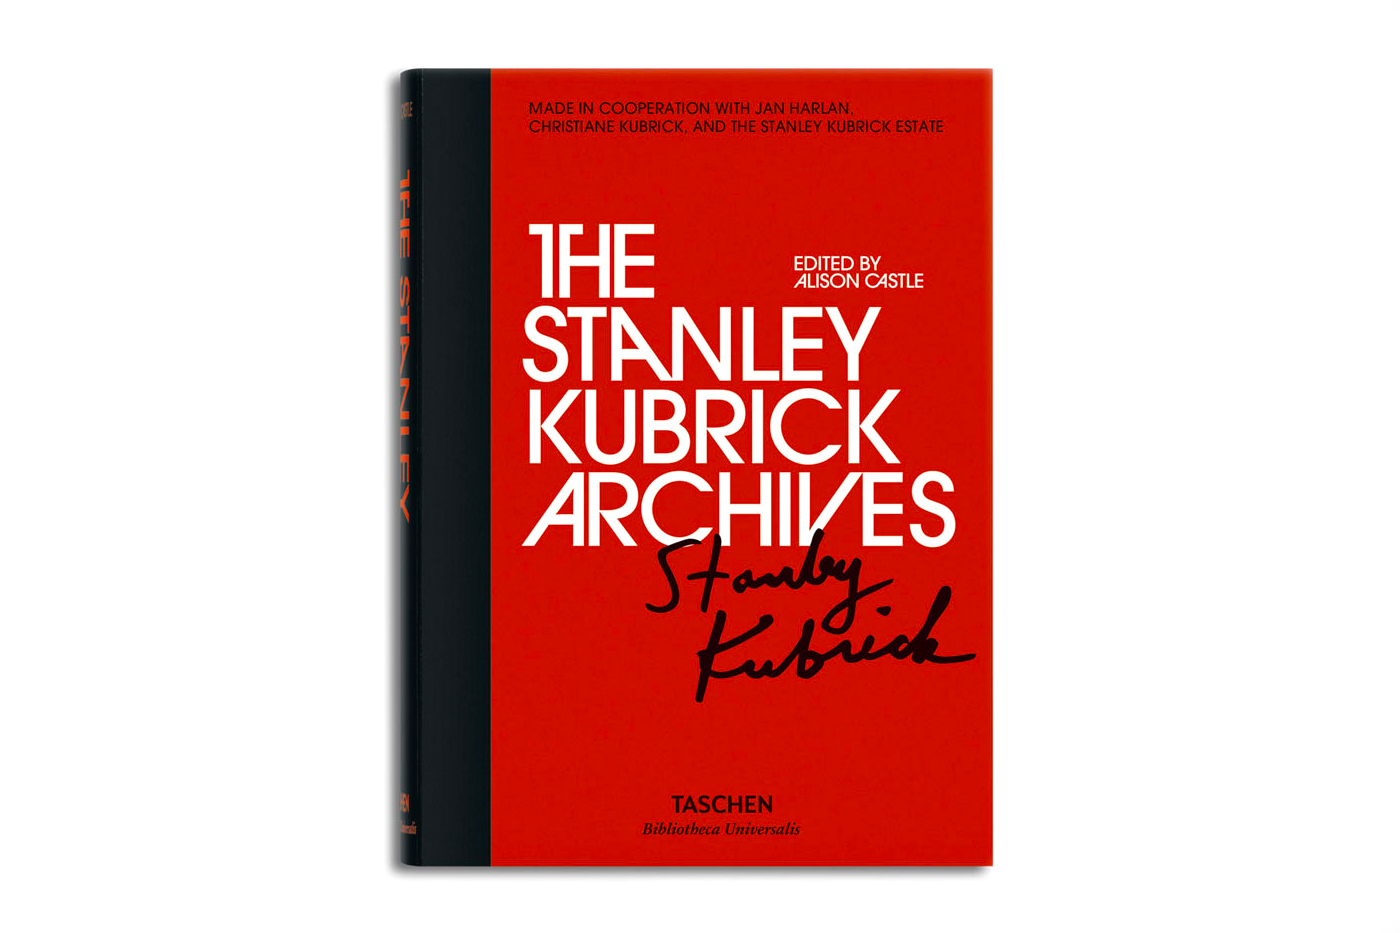 THE STANLEY KUBRICK ARCHIVES Book | Hypebeast